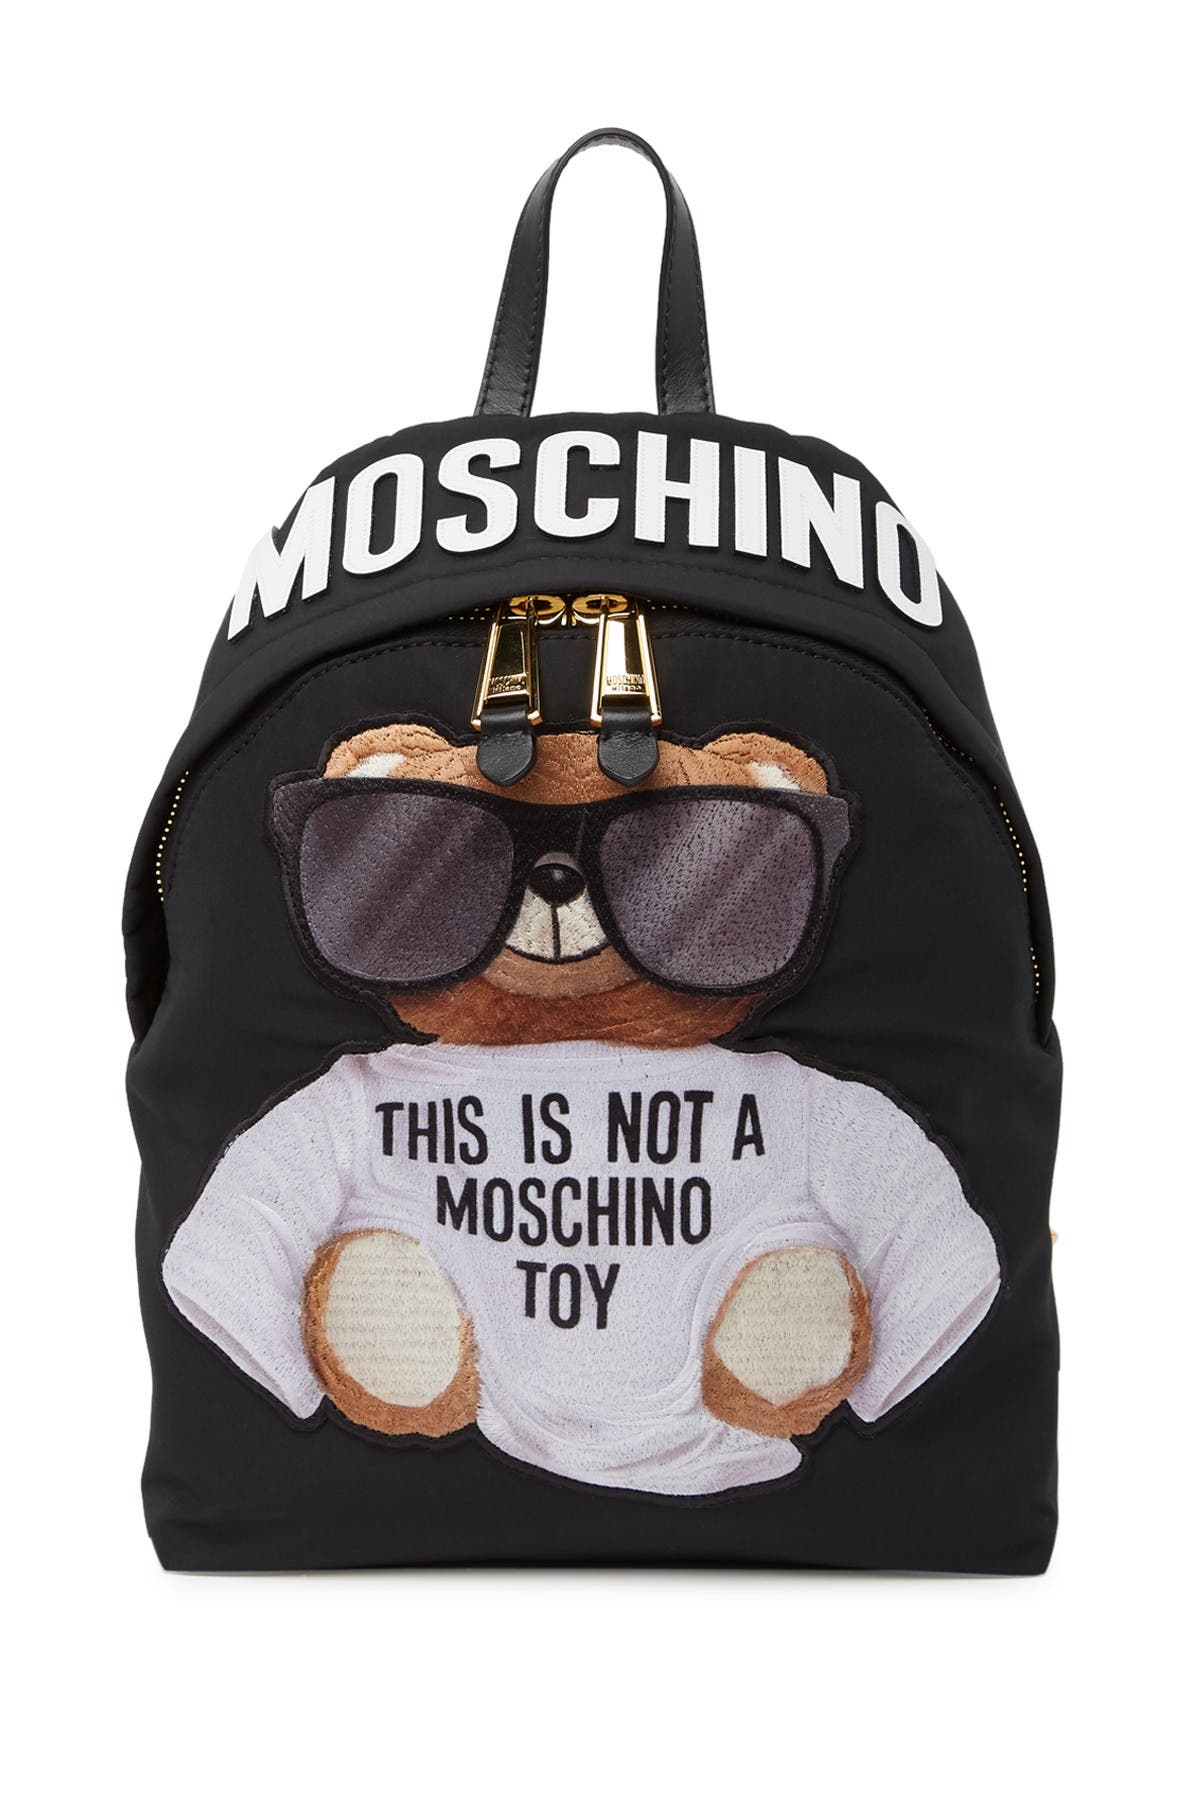 moschino backpack nordstrom